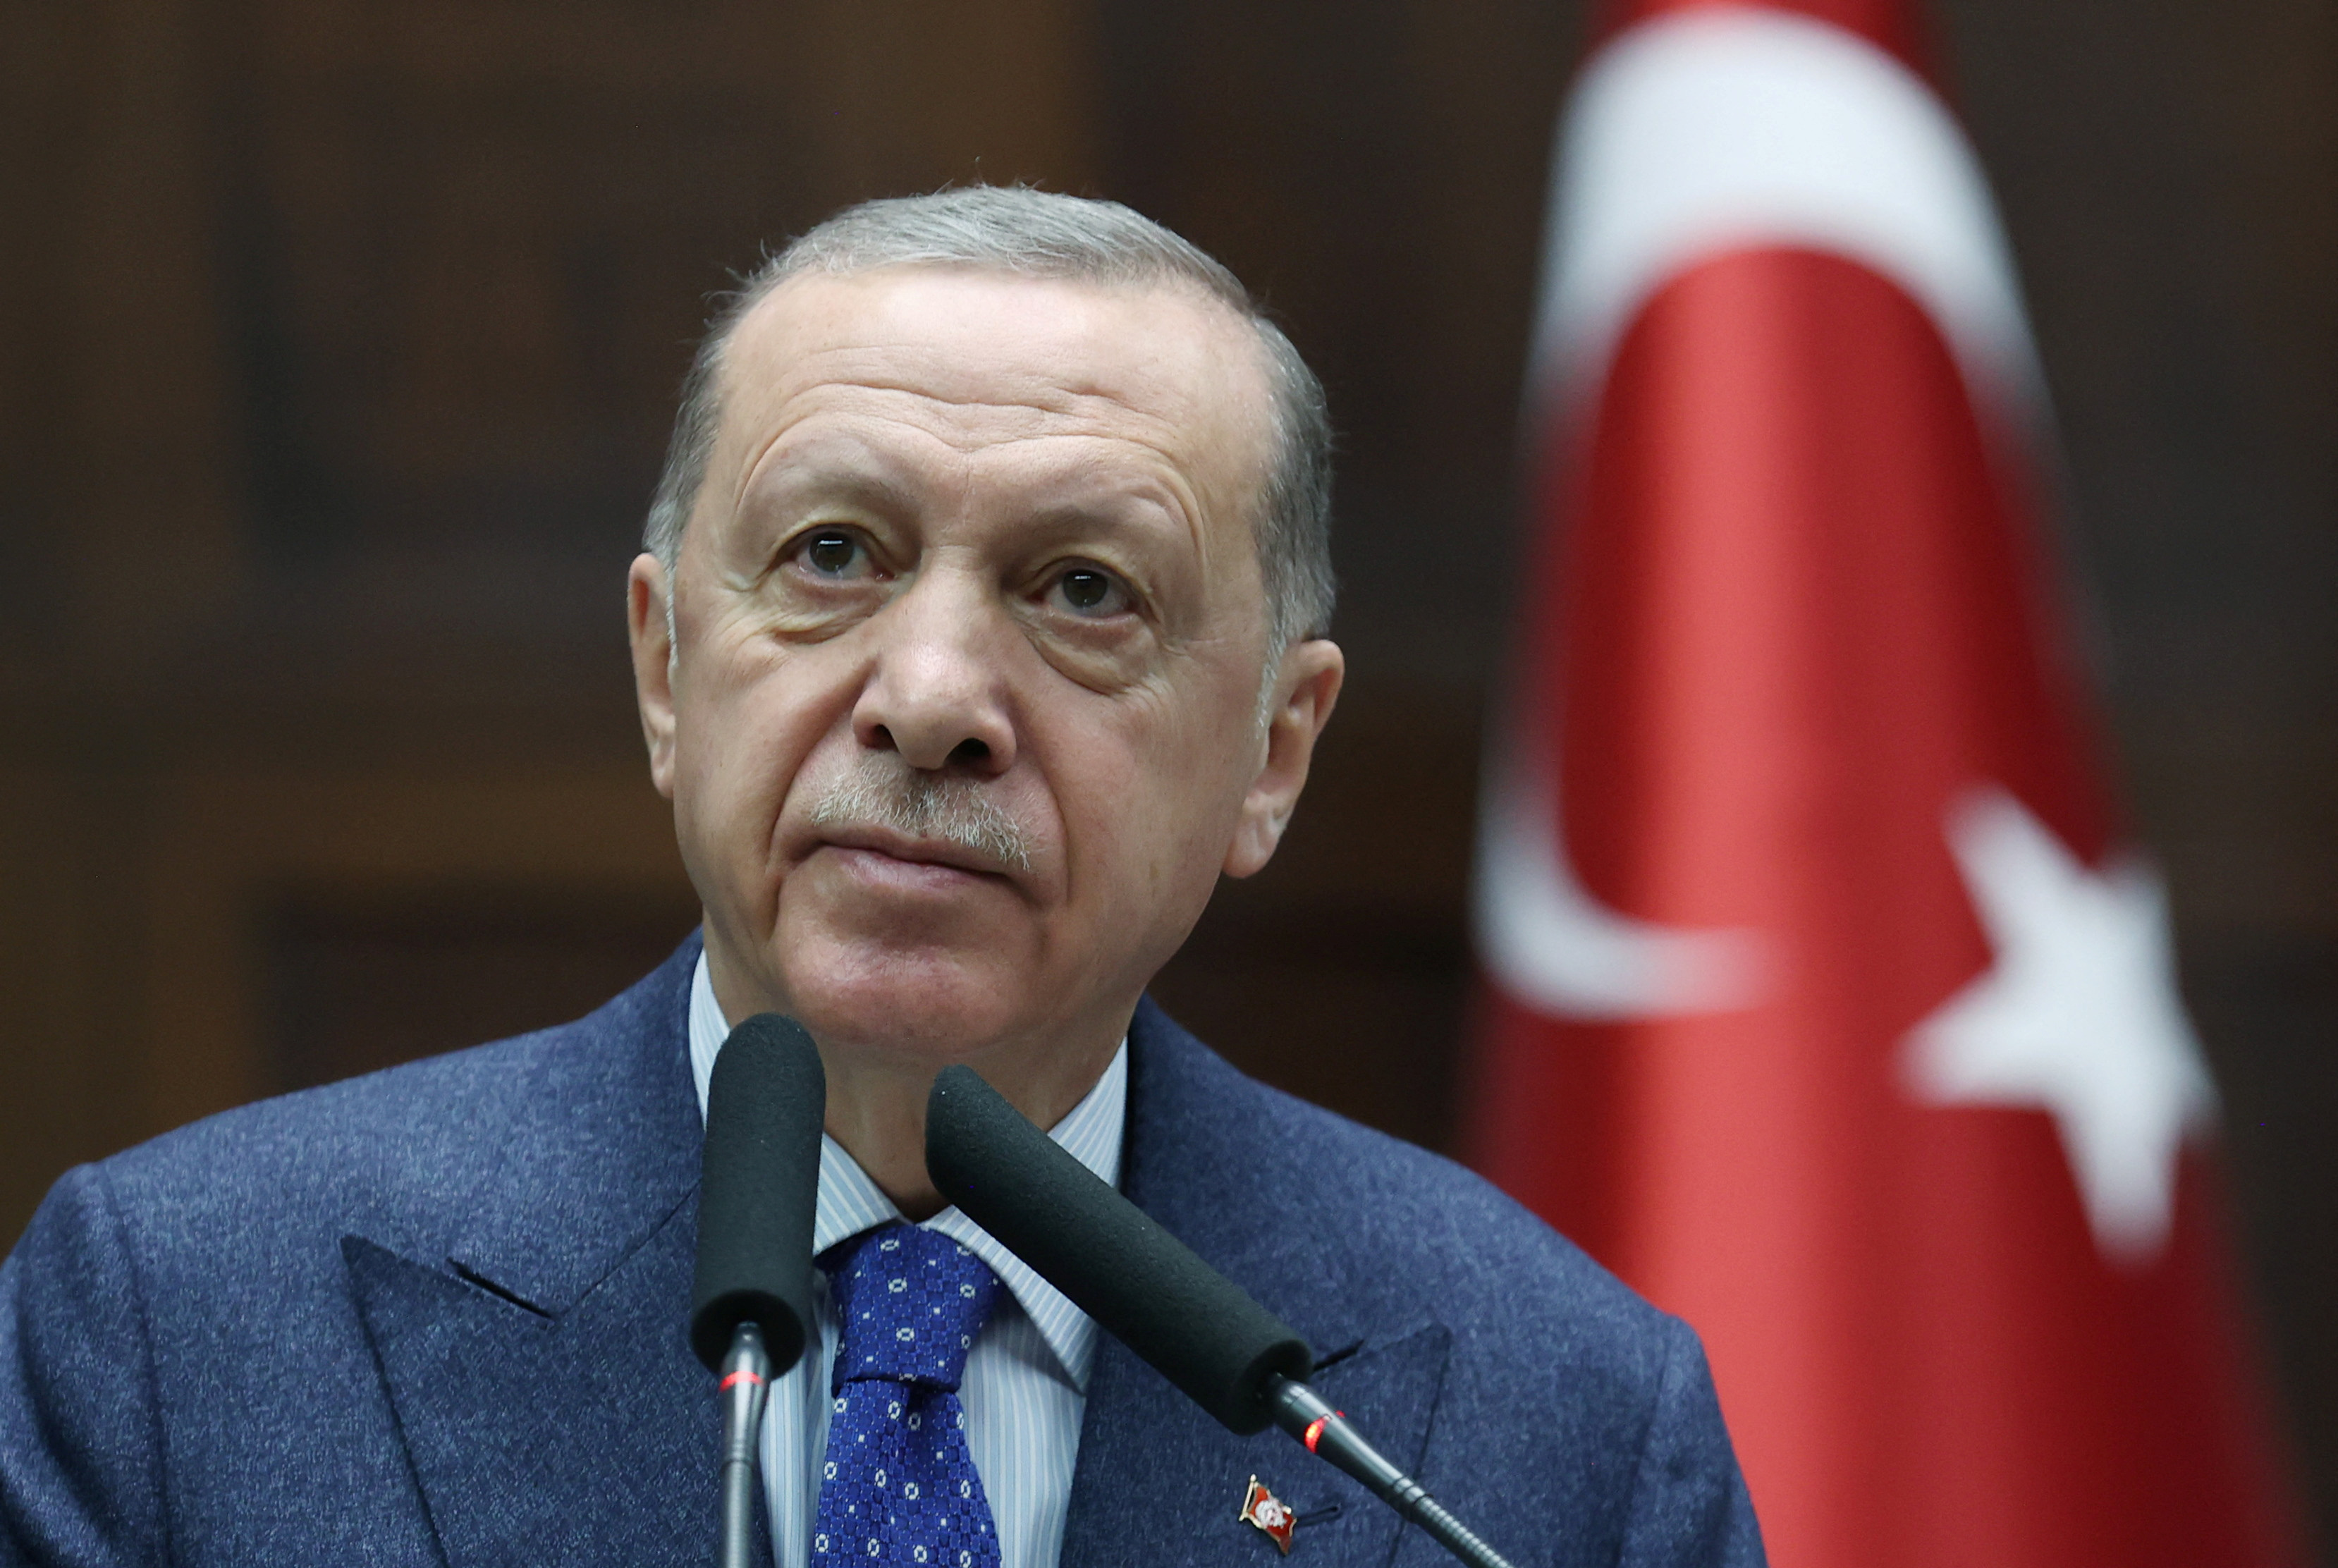 Turkey's President Erdogan says Western missions will 'pay' for